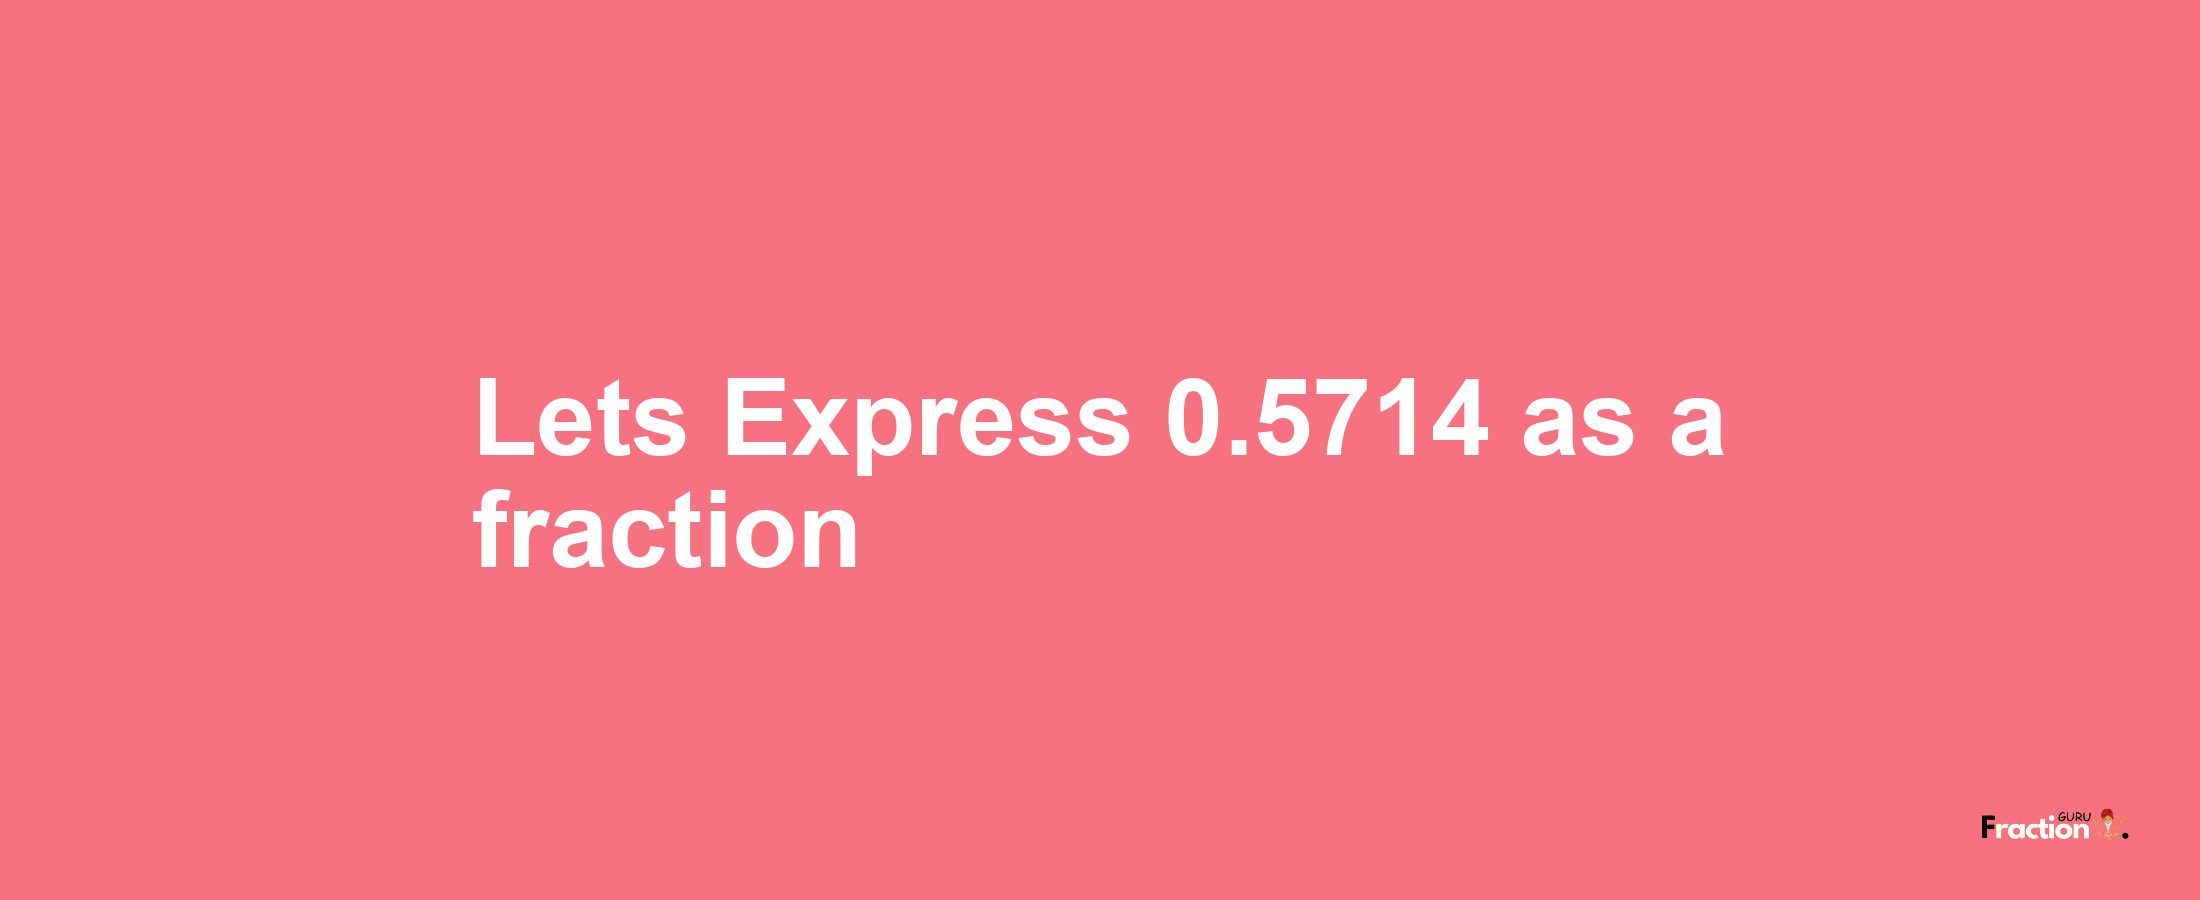 Lets Express 0.5714 as afraction